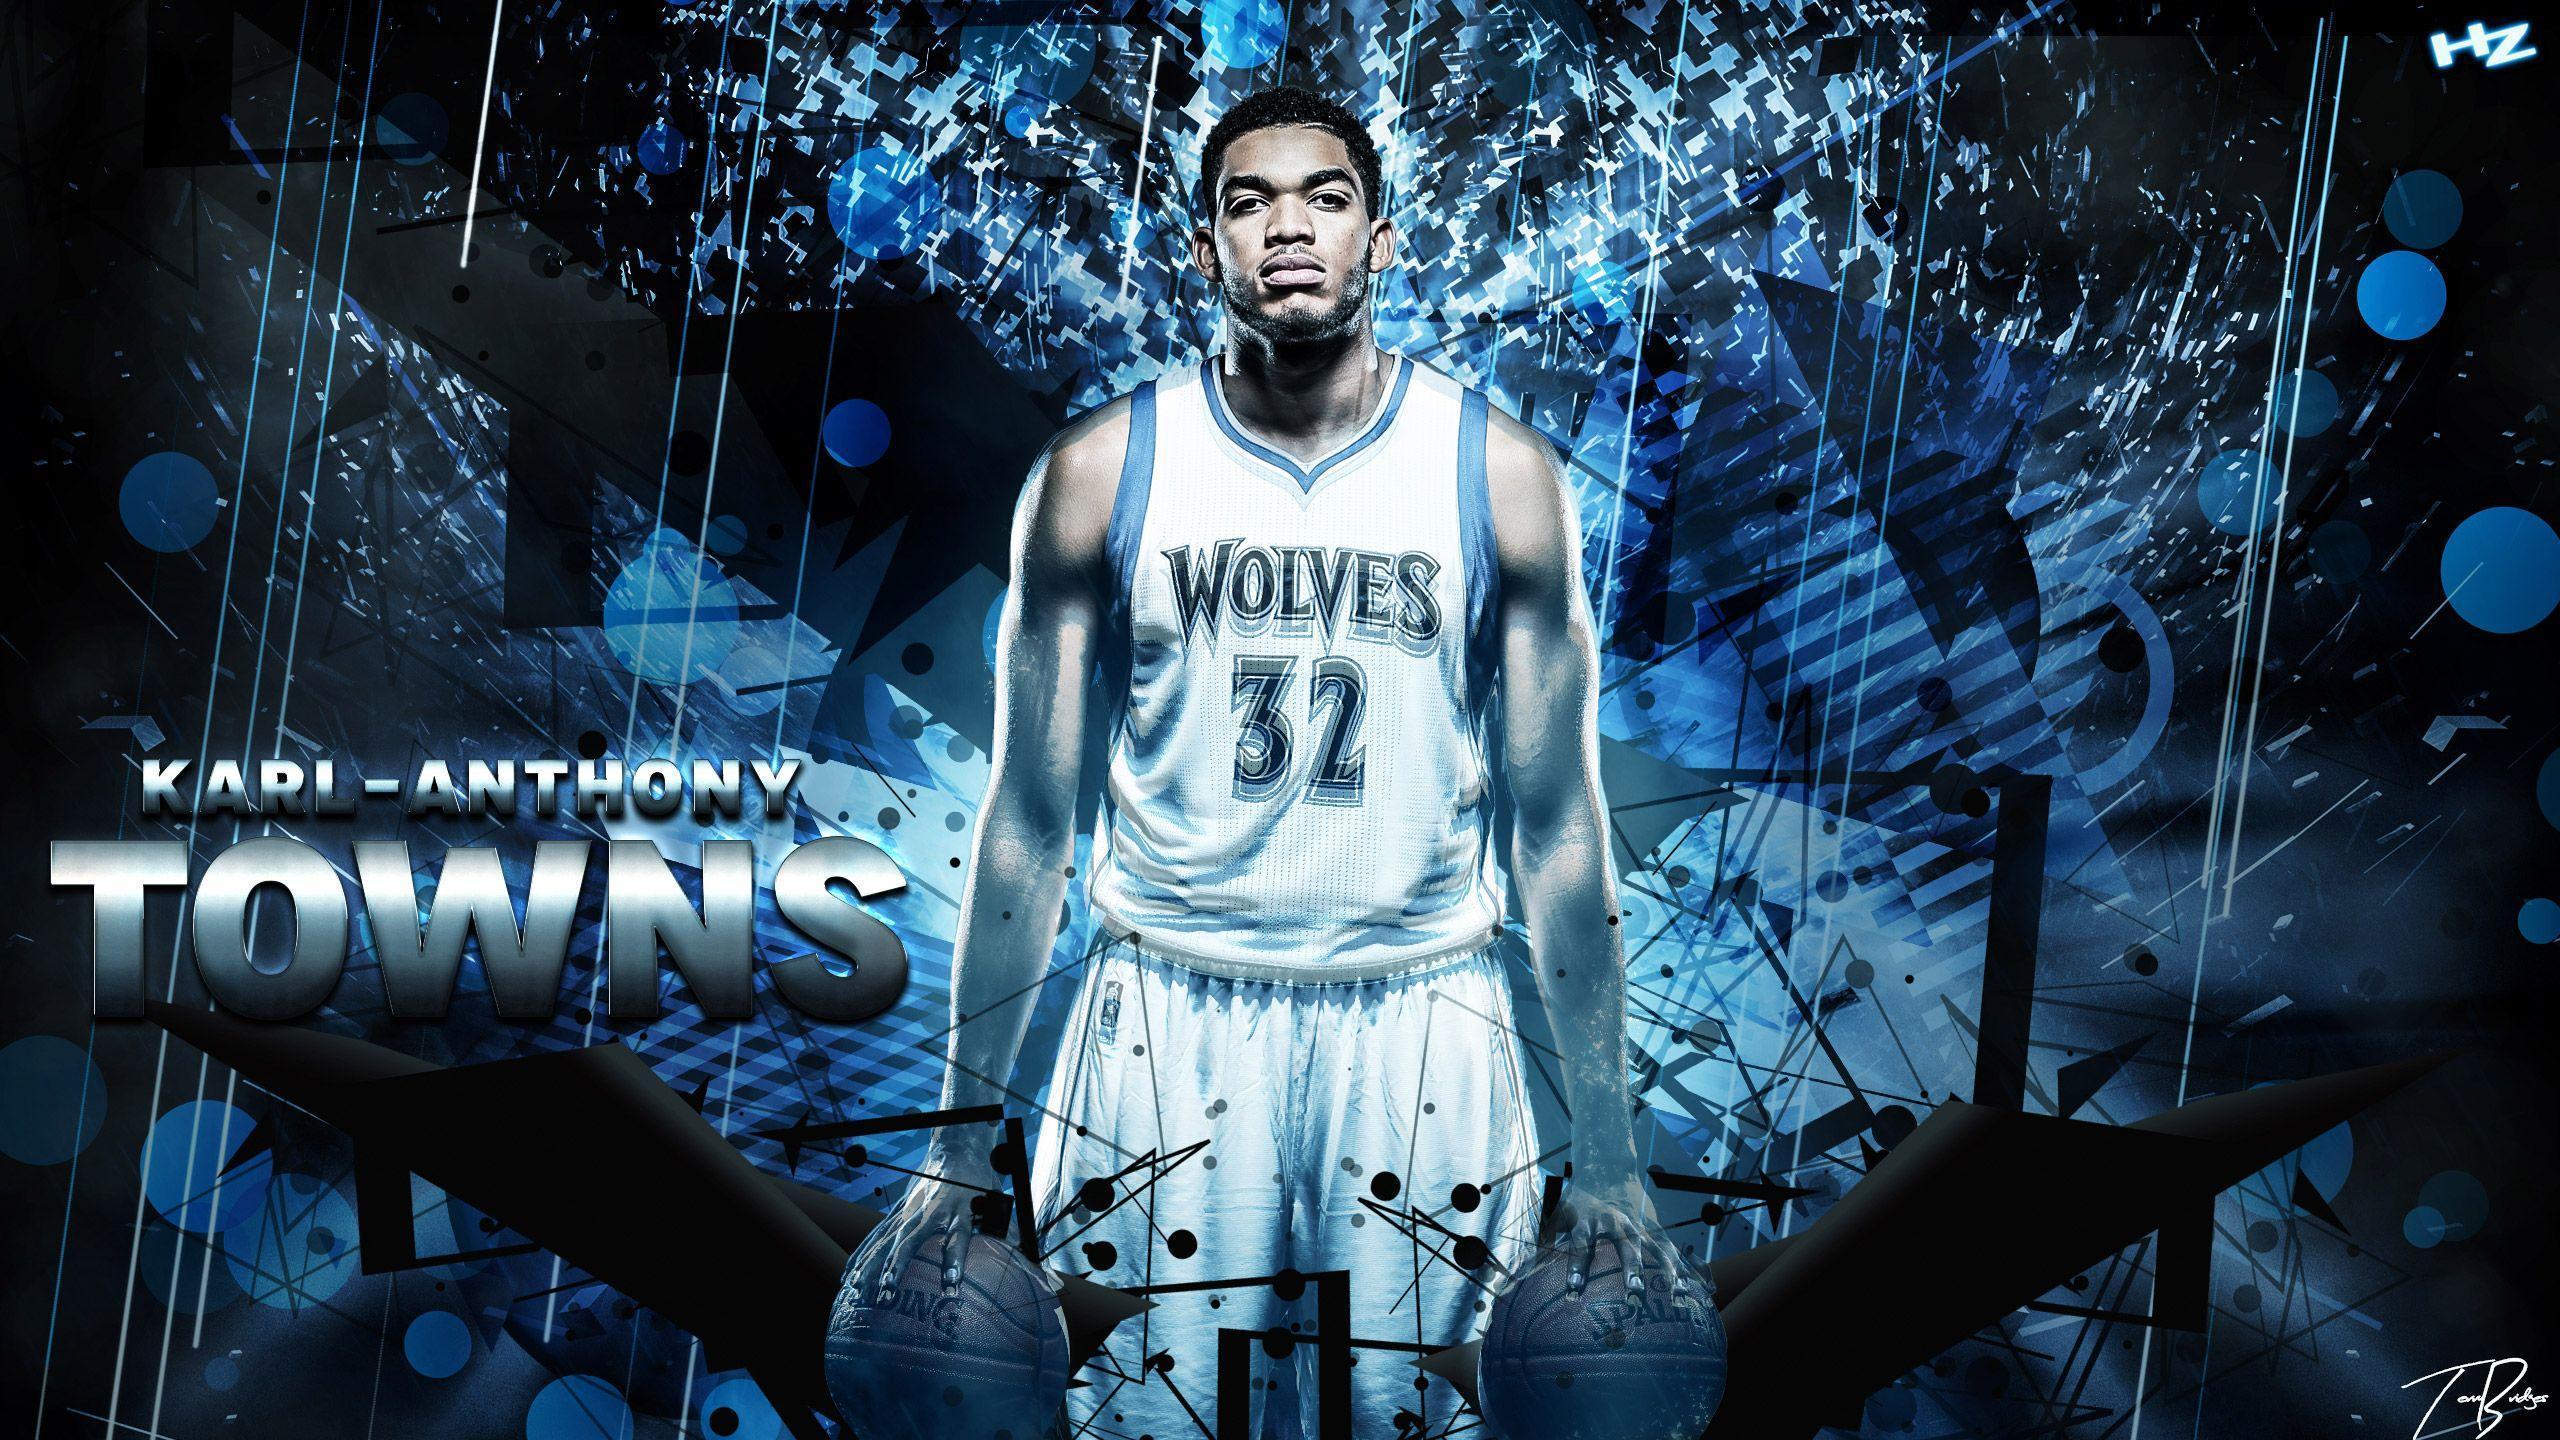 Karl-Anthony Towns Wallpaper 2560x1440 